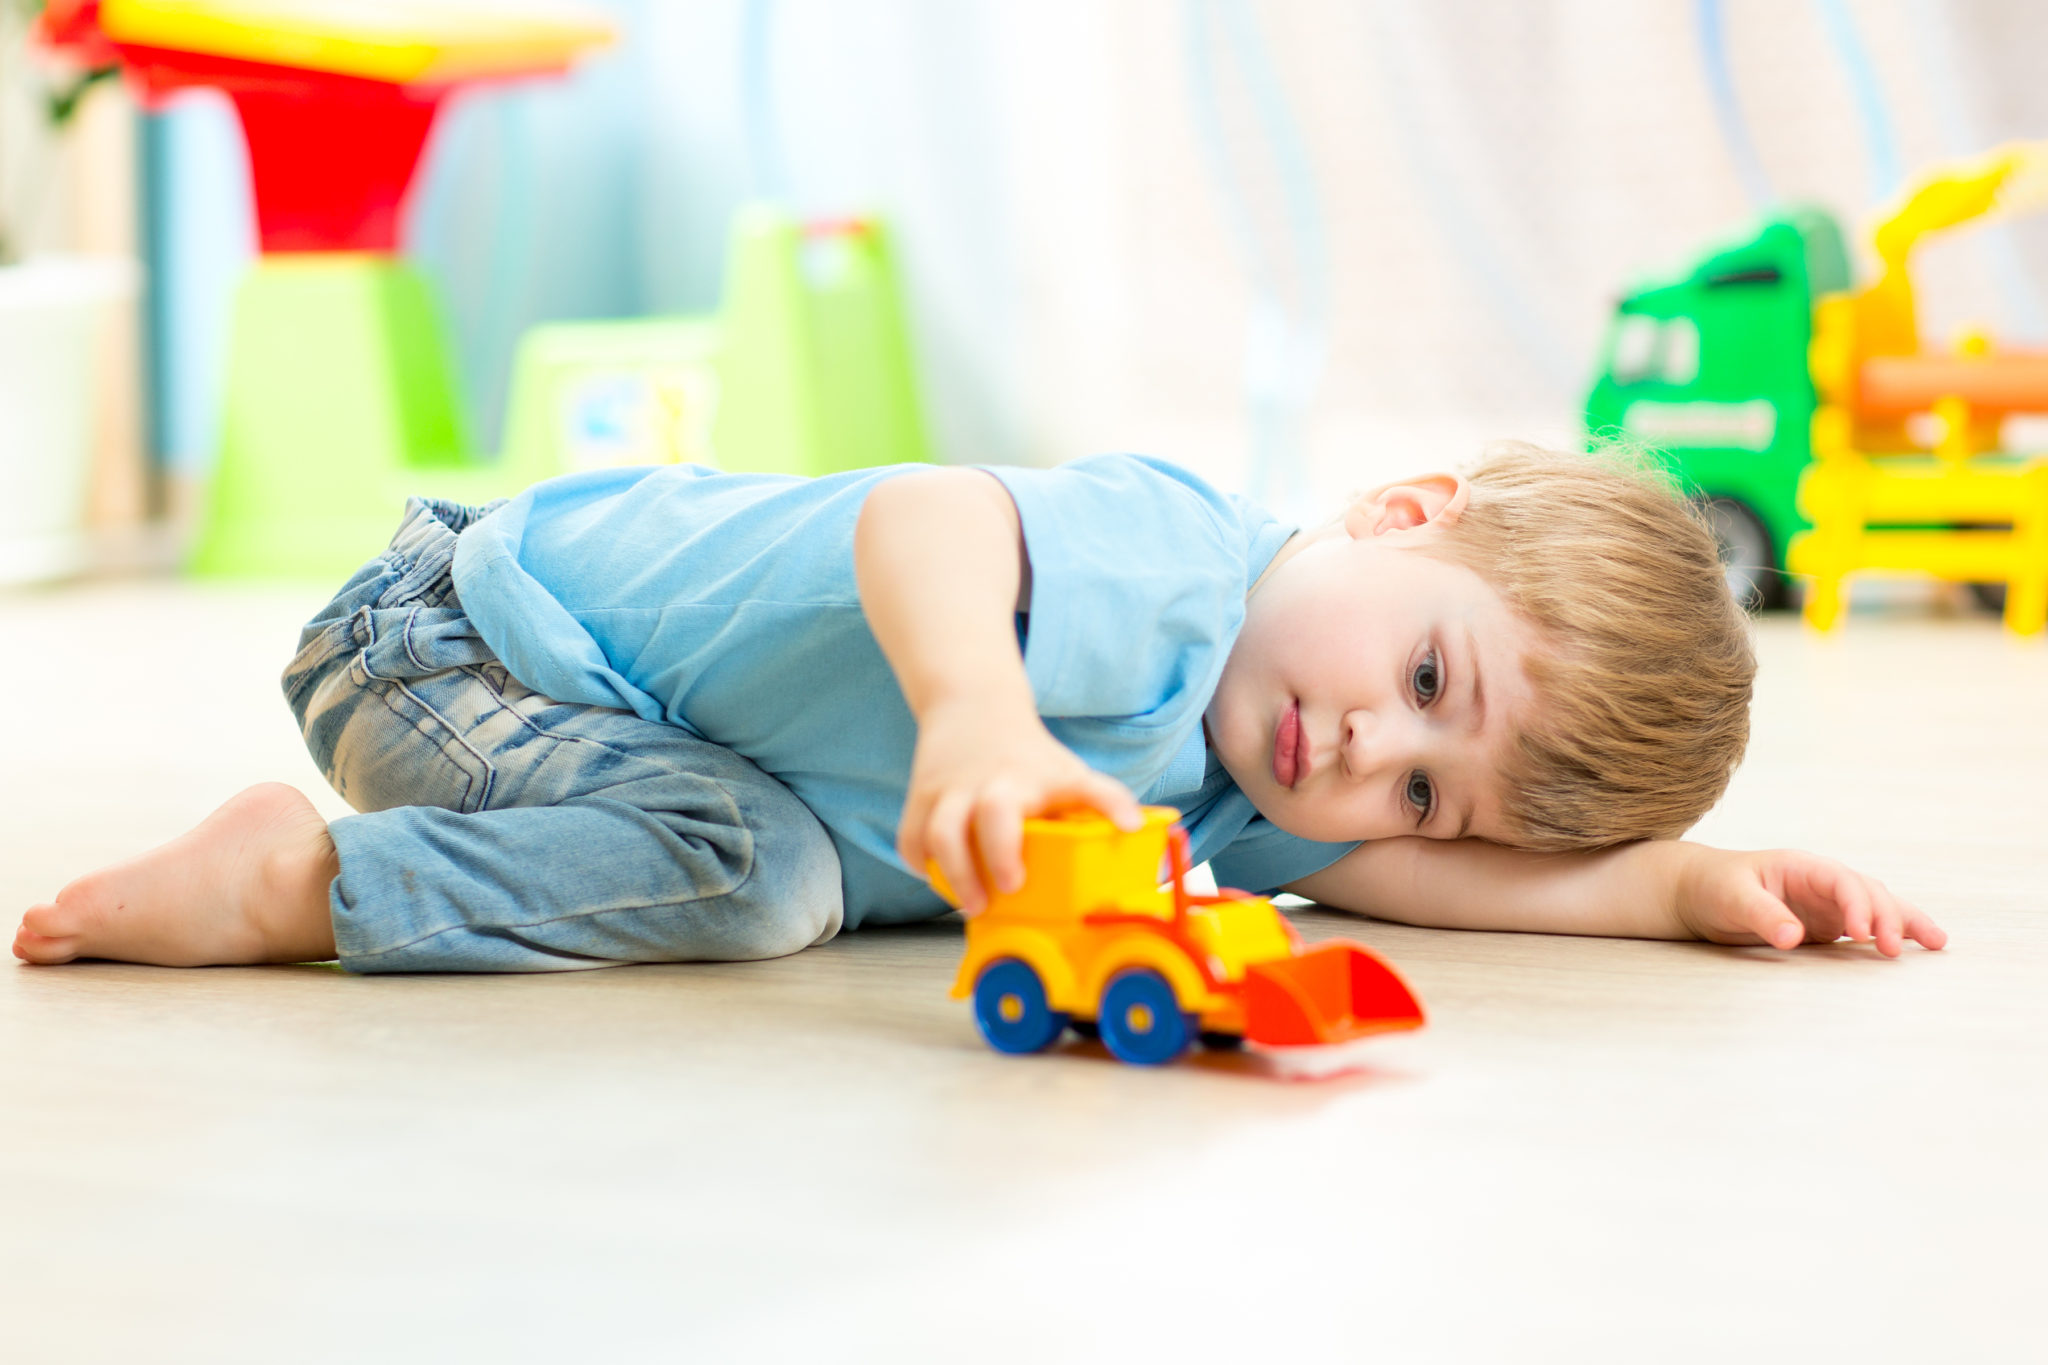 child boy toddler playing with toy car indoors